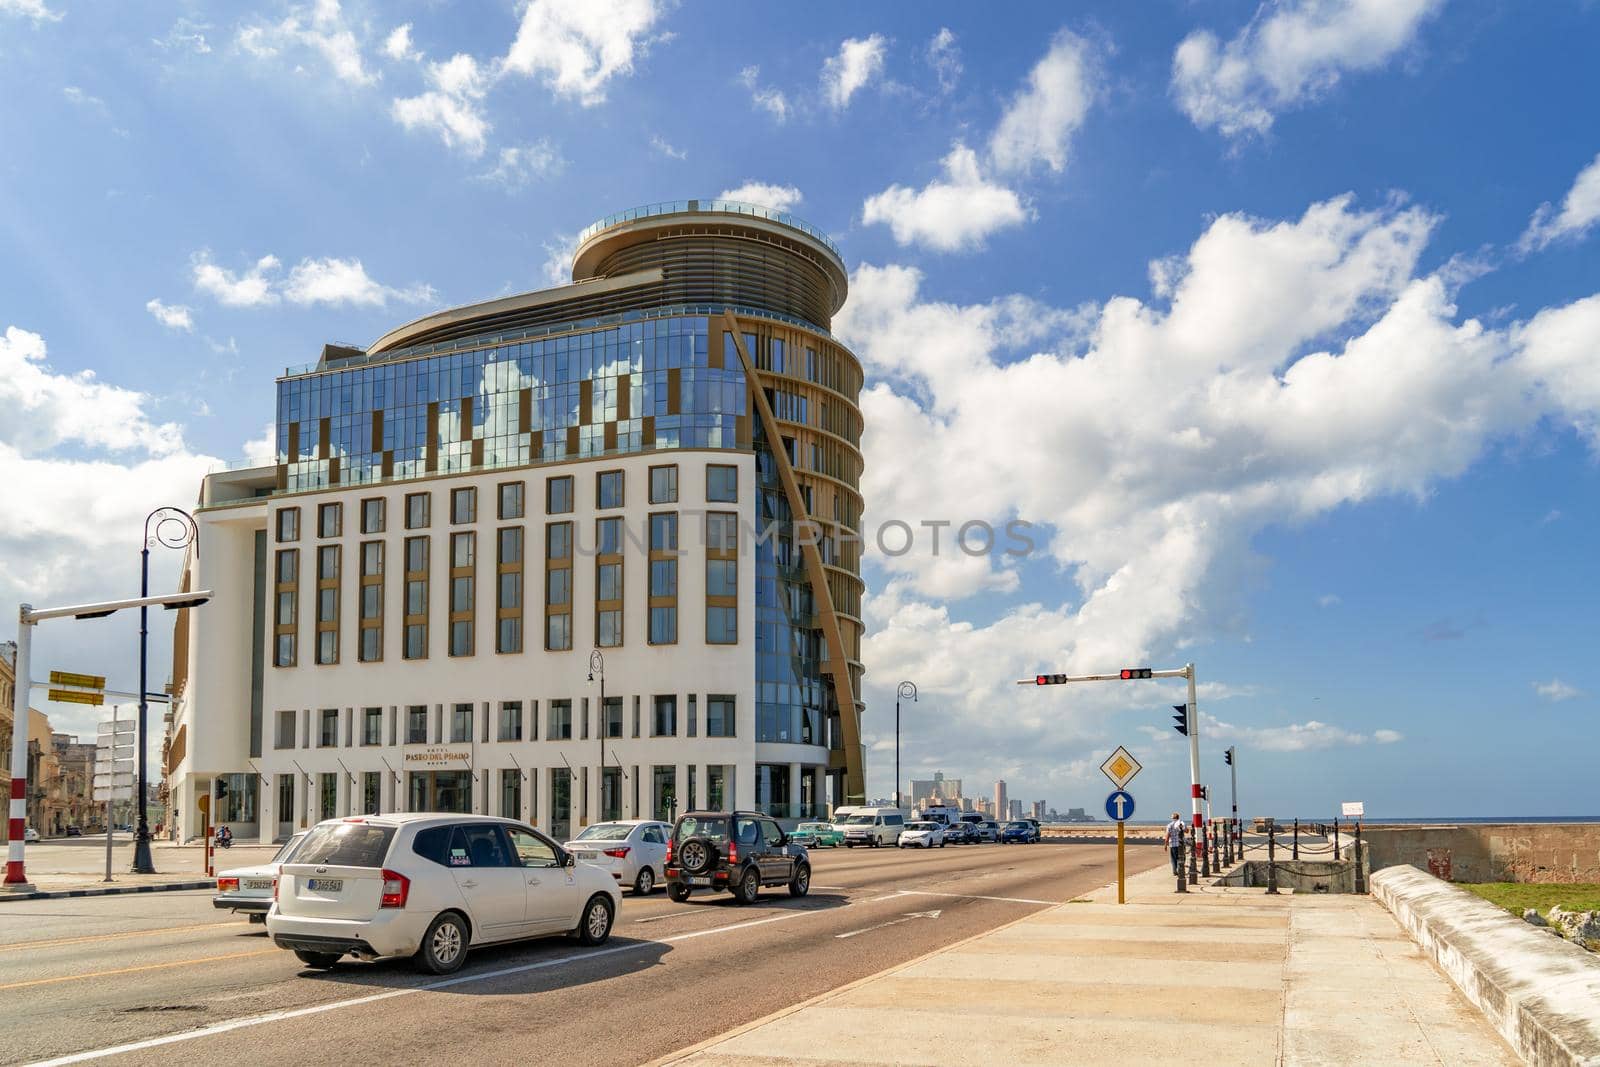 Havana Cuba. November 25, 2020: Hotel Paseo del Prado, modern building on the Malecon in Havana. Place visited by tourists.